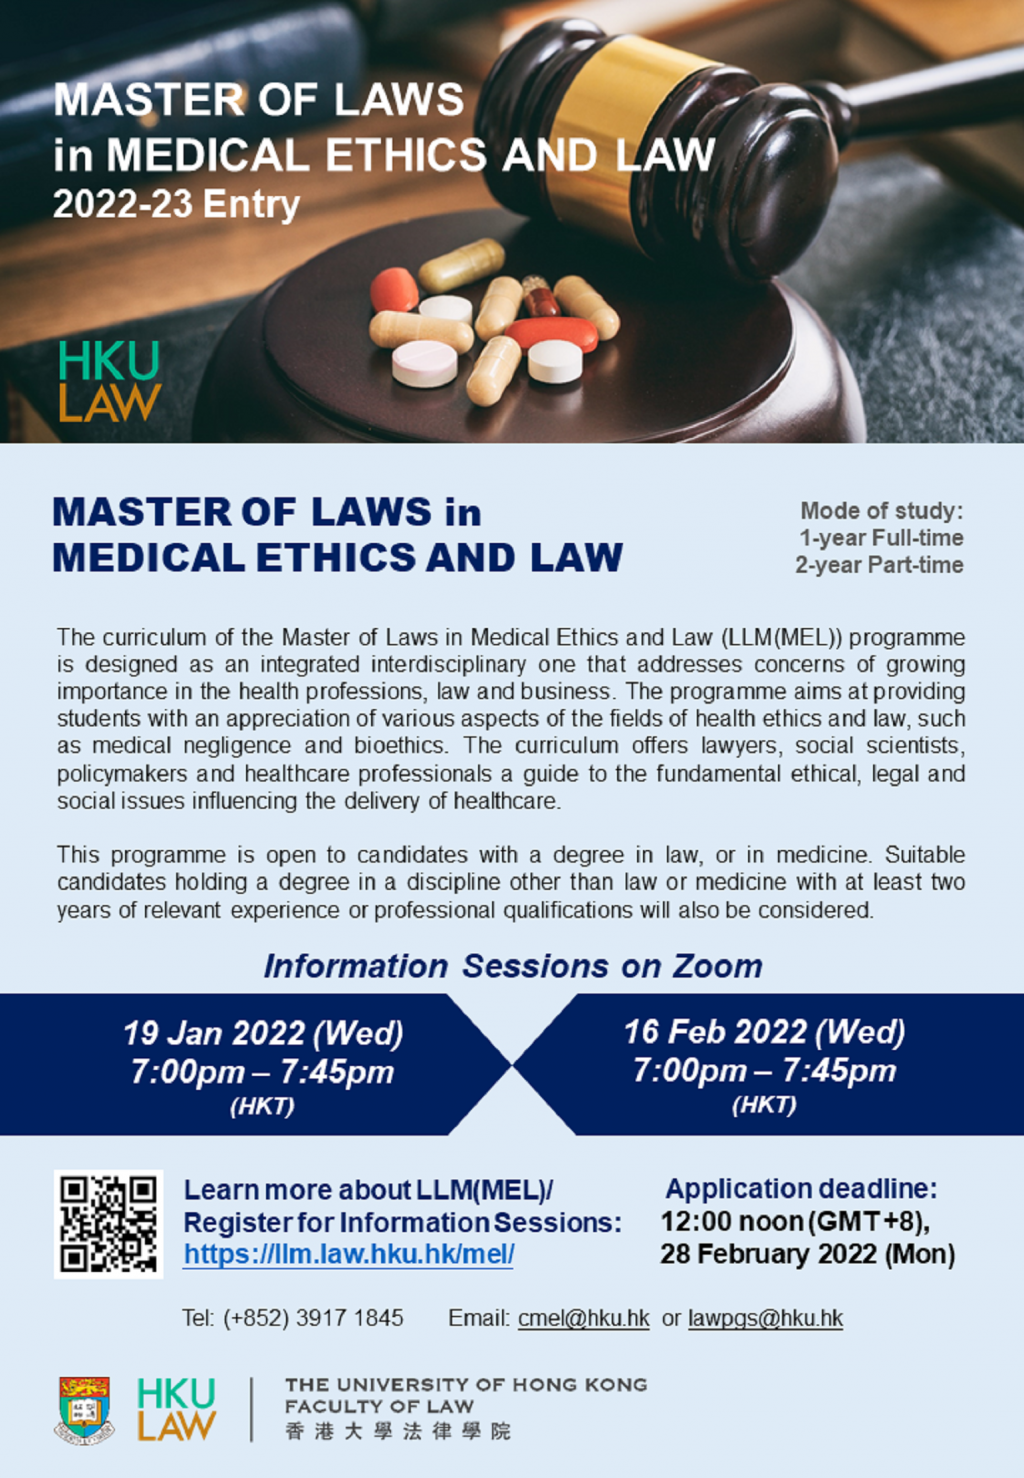 Master of Laws in Medical Ethics and Law (Info Session on Zoom)